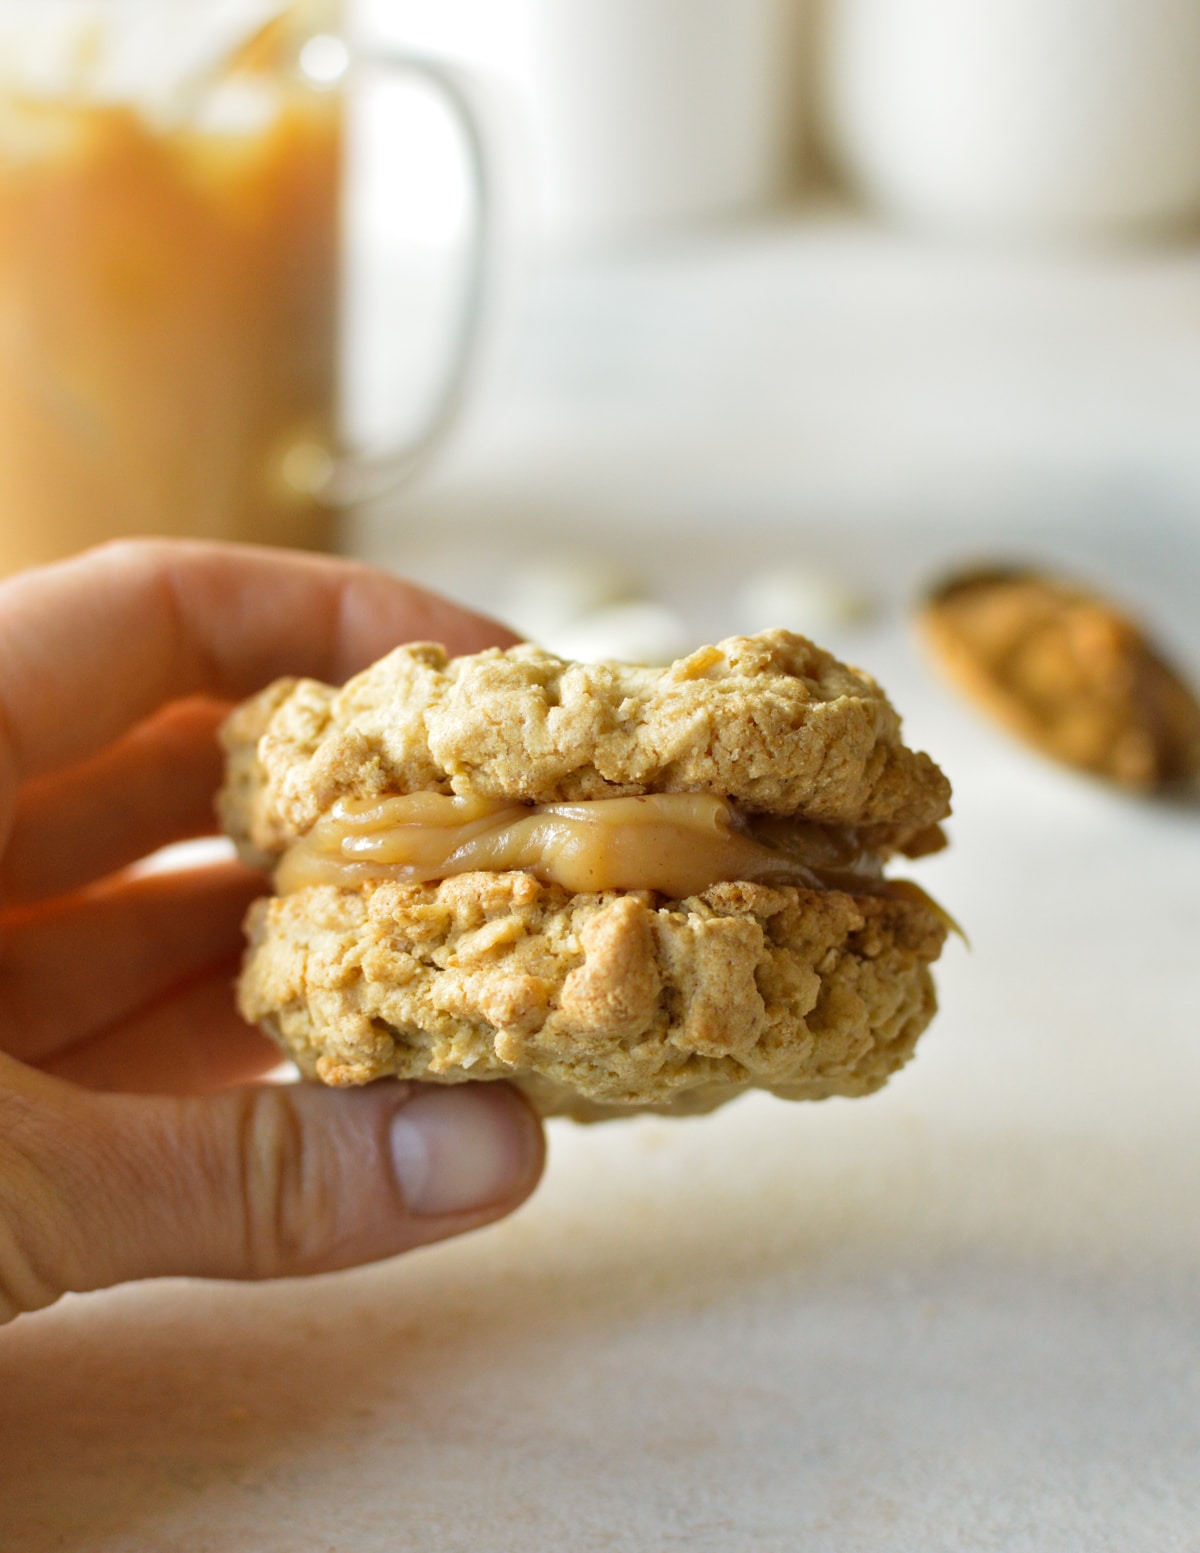 an oatmeal cookie filled with peanut butter ganache.